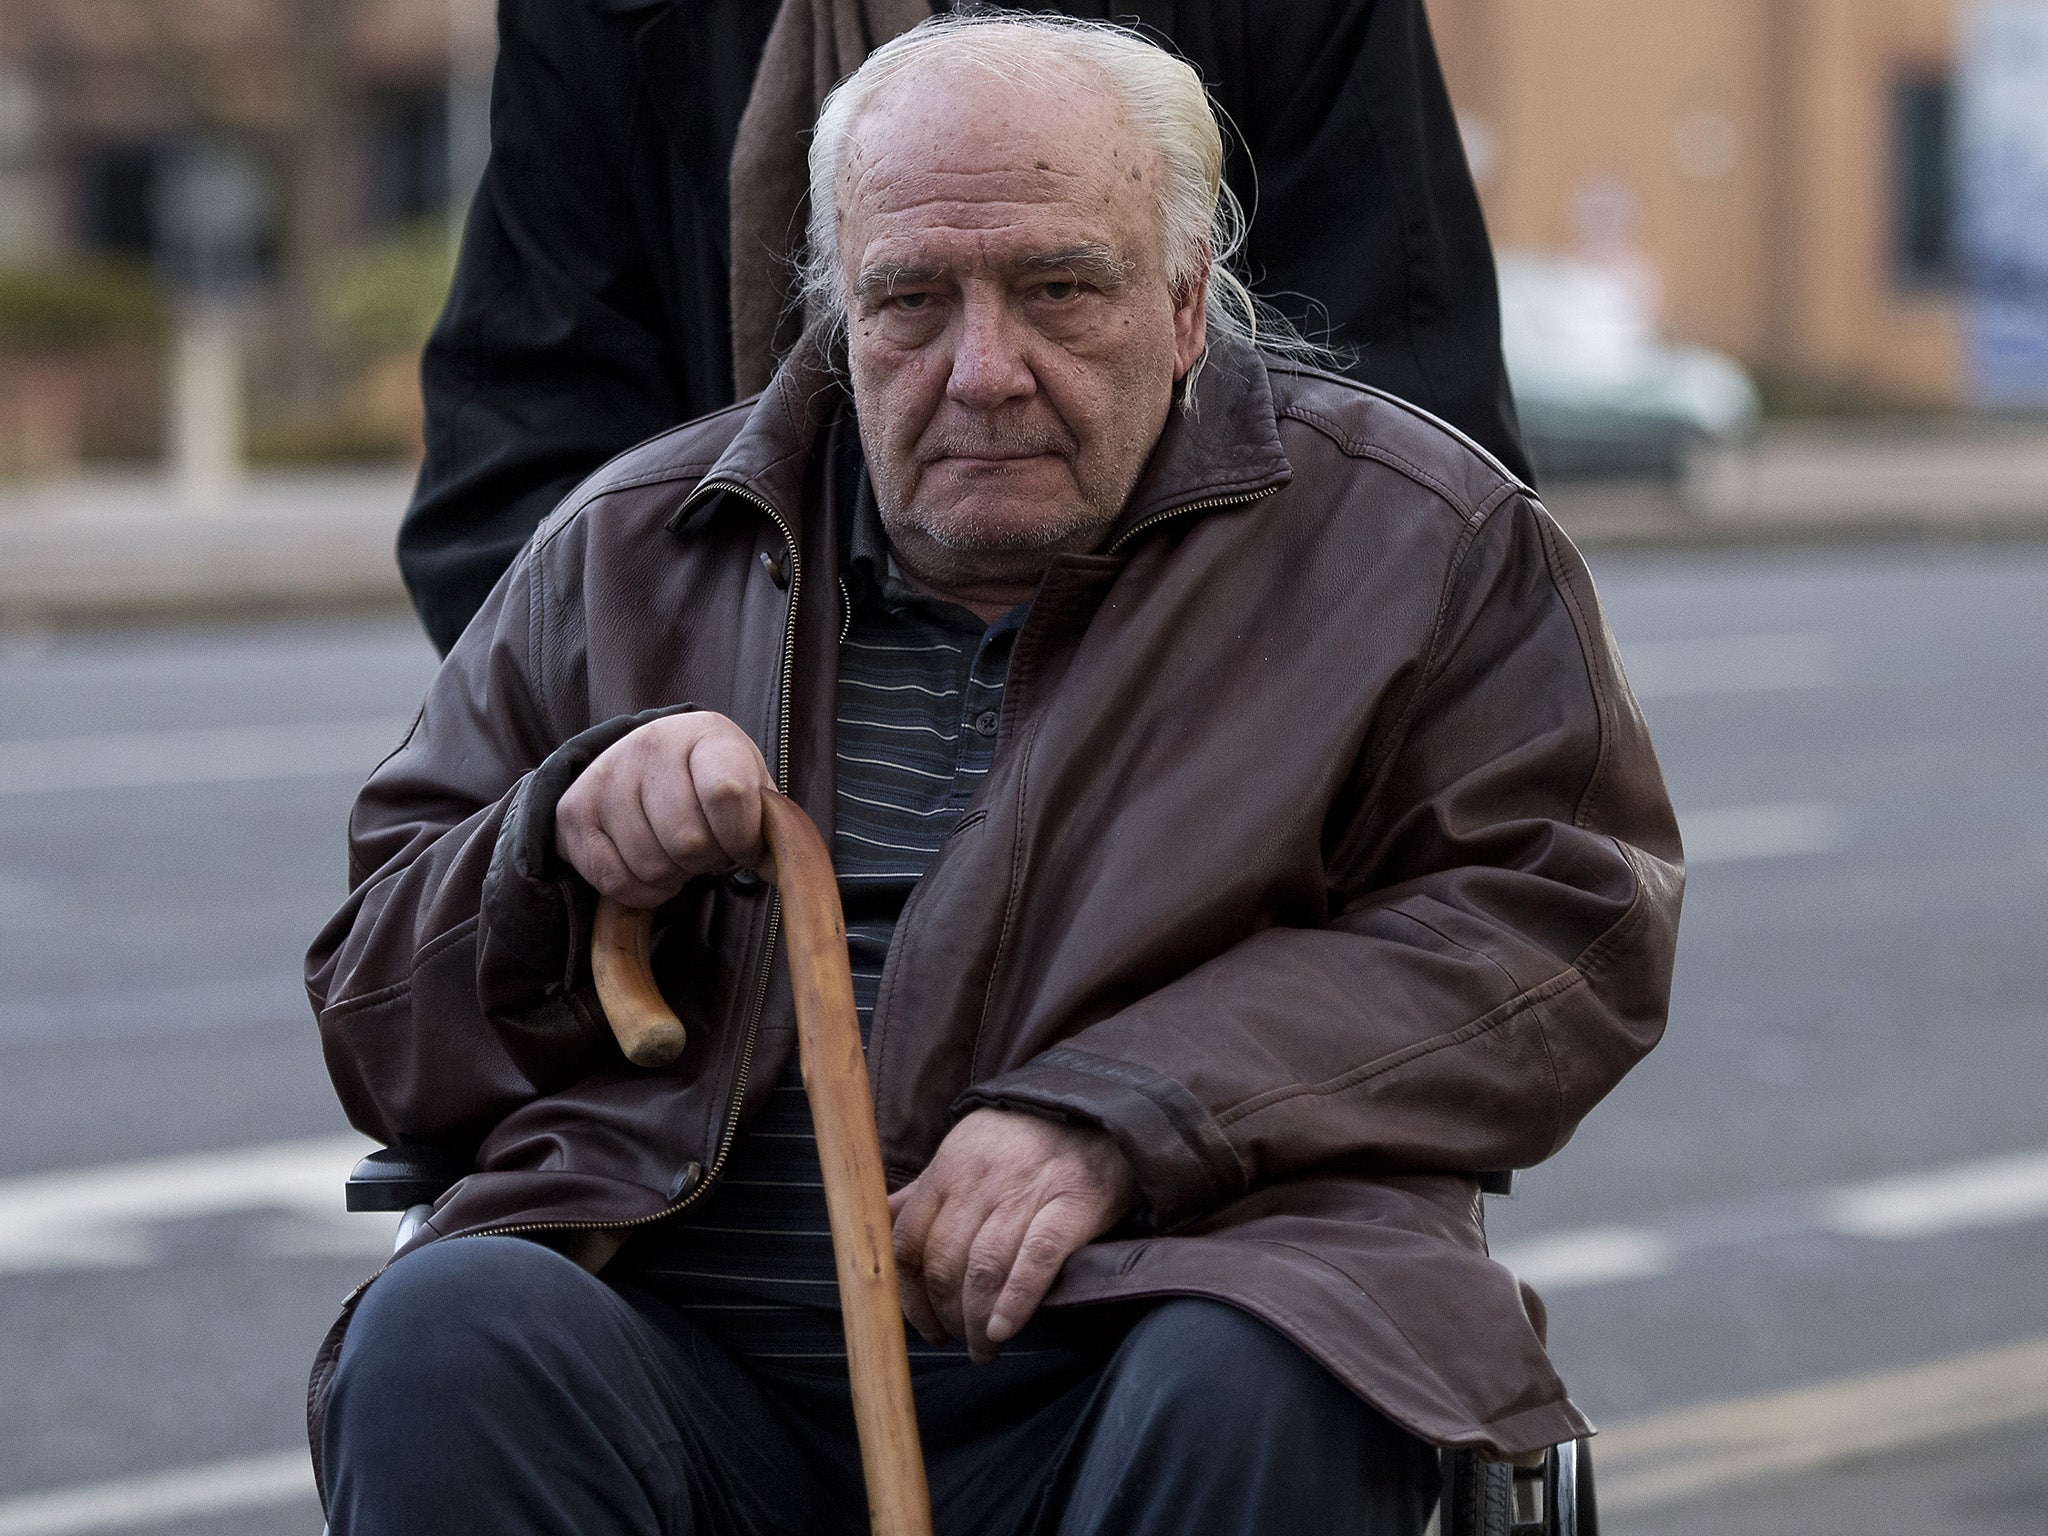 Vladimir Bukovsky arriving at Cambridge Crown Court in December 2016 to deny child pornography allegations. He was not present at Monday's hearing